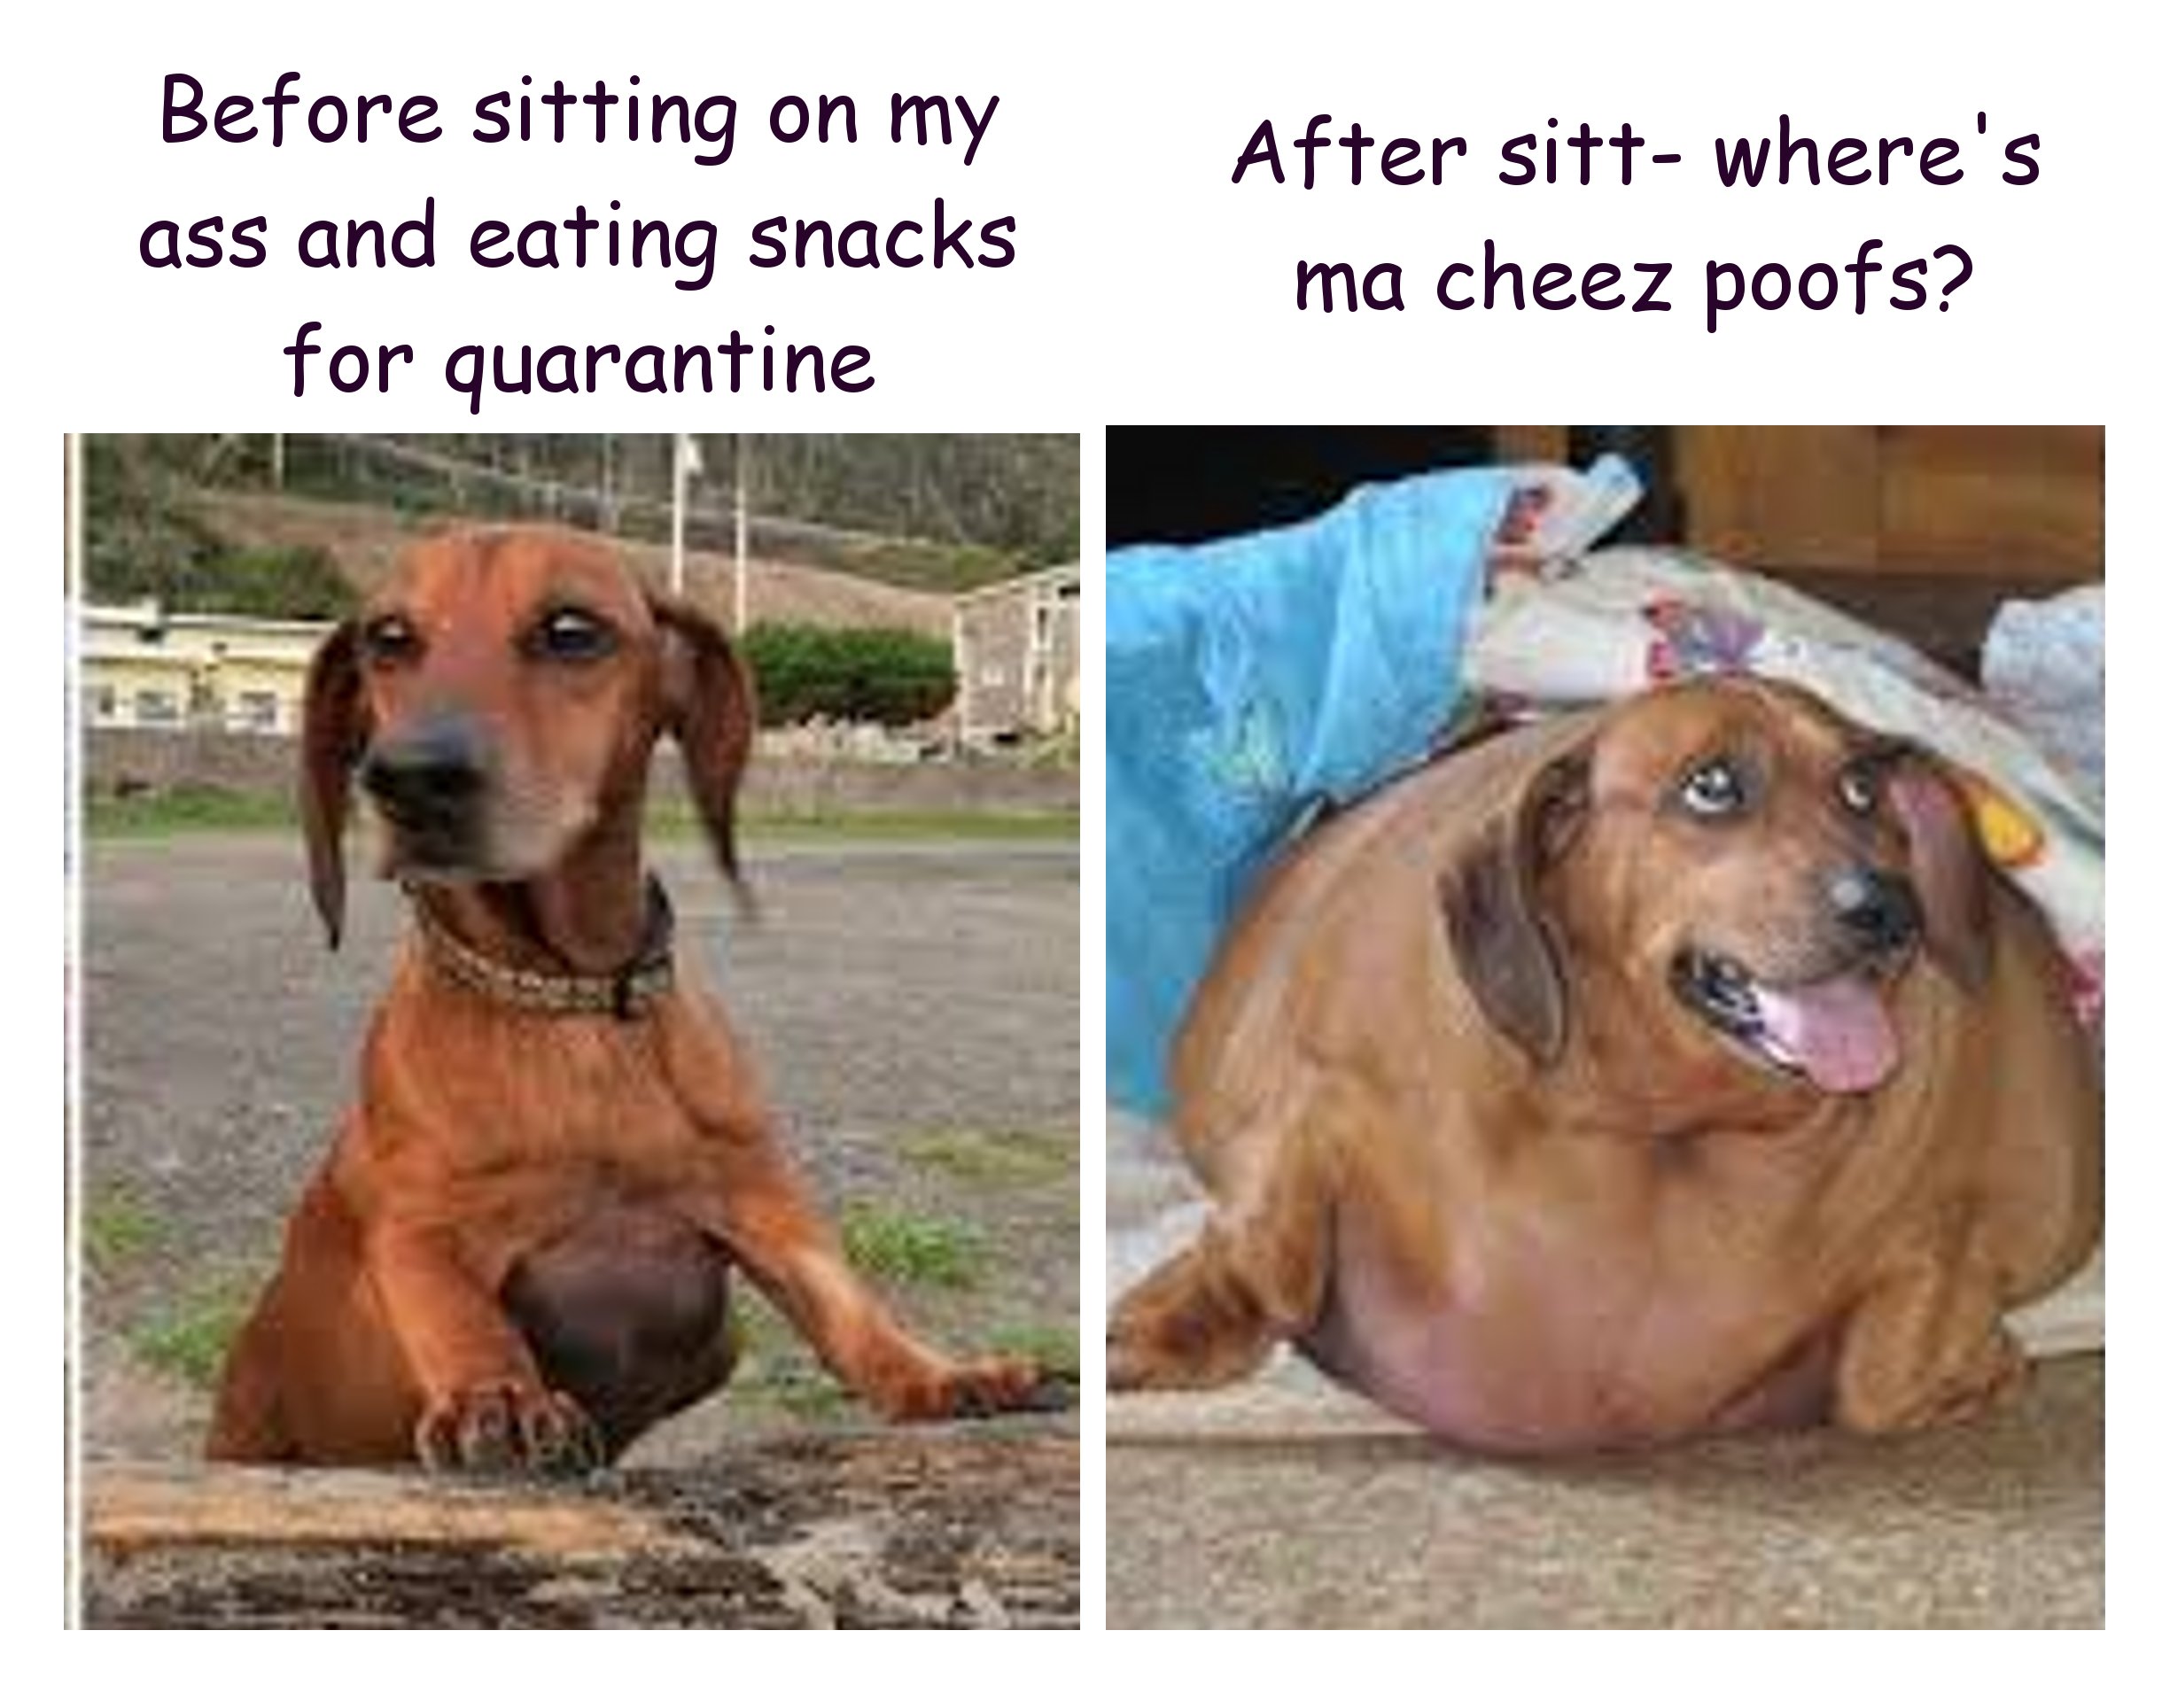 skinny versus fat dog before after photos - Before sitting on my ass and eating snacks for quarantine - After sitt where's ma cheez poofs?